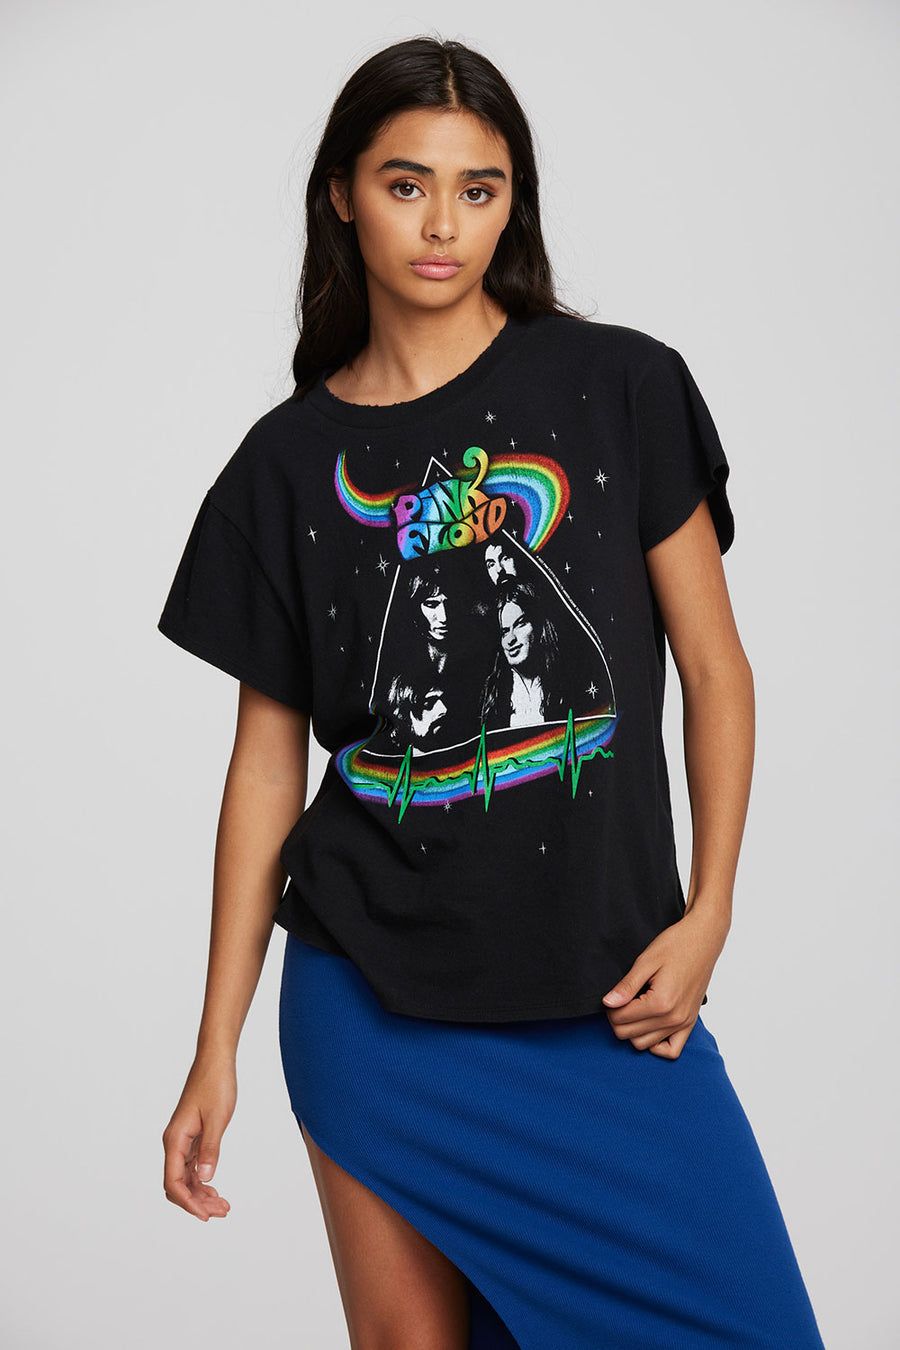 Pink Floyd - Rainbow Dark Side of the Moon Womens chaserbrand